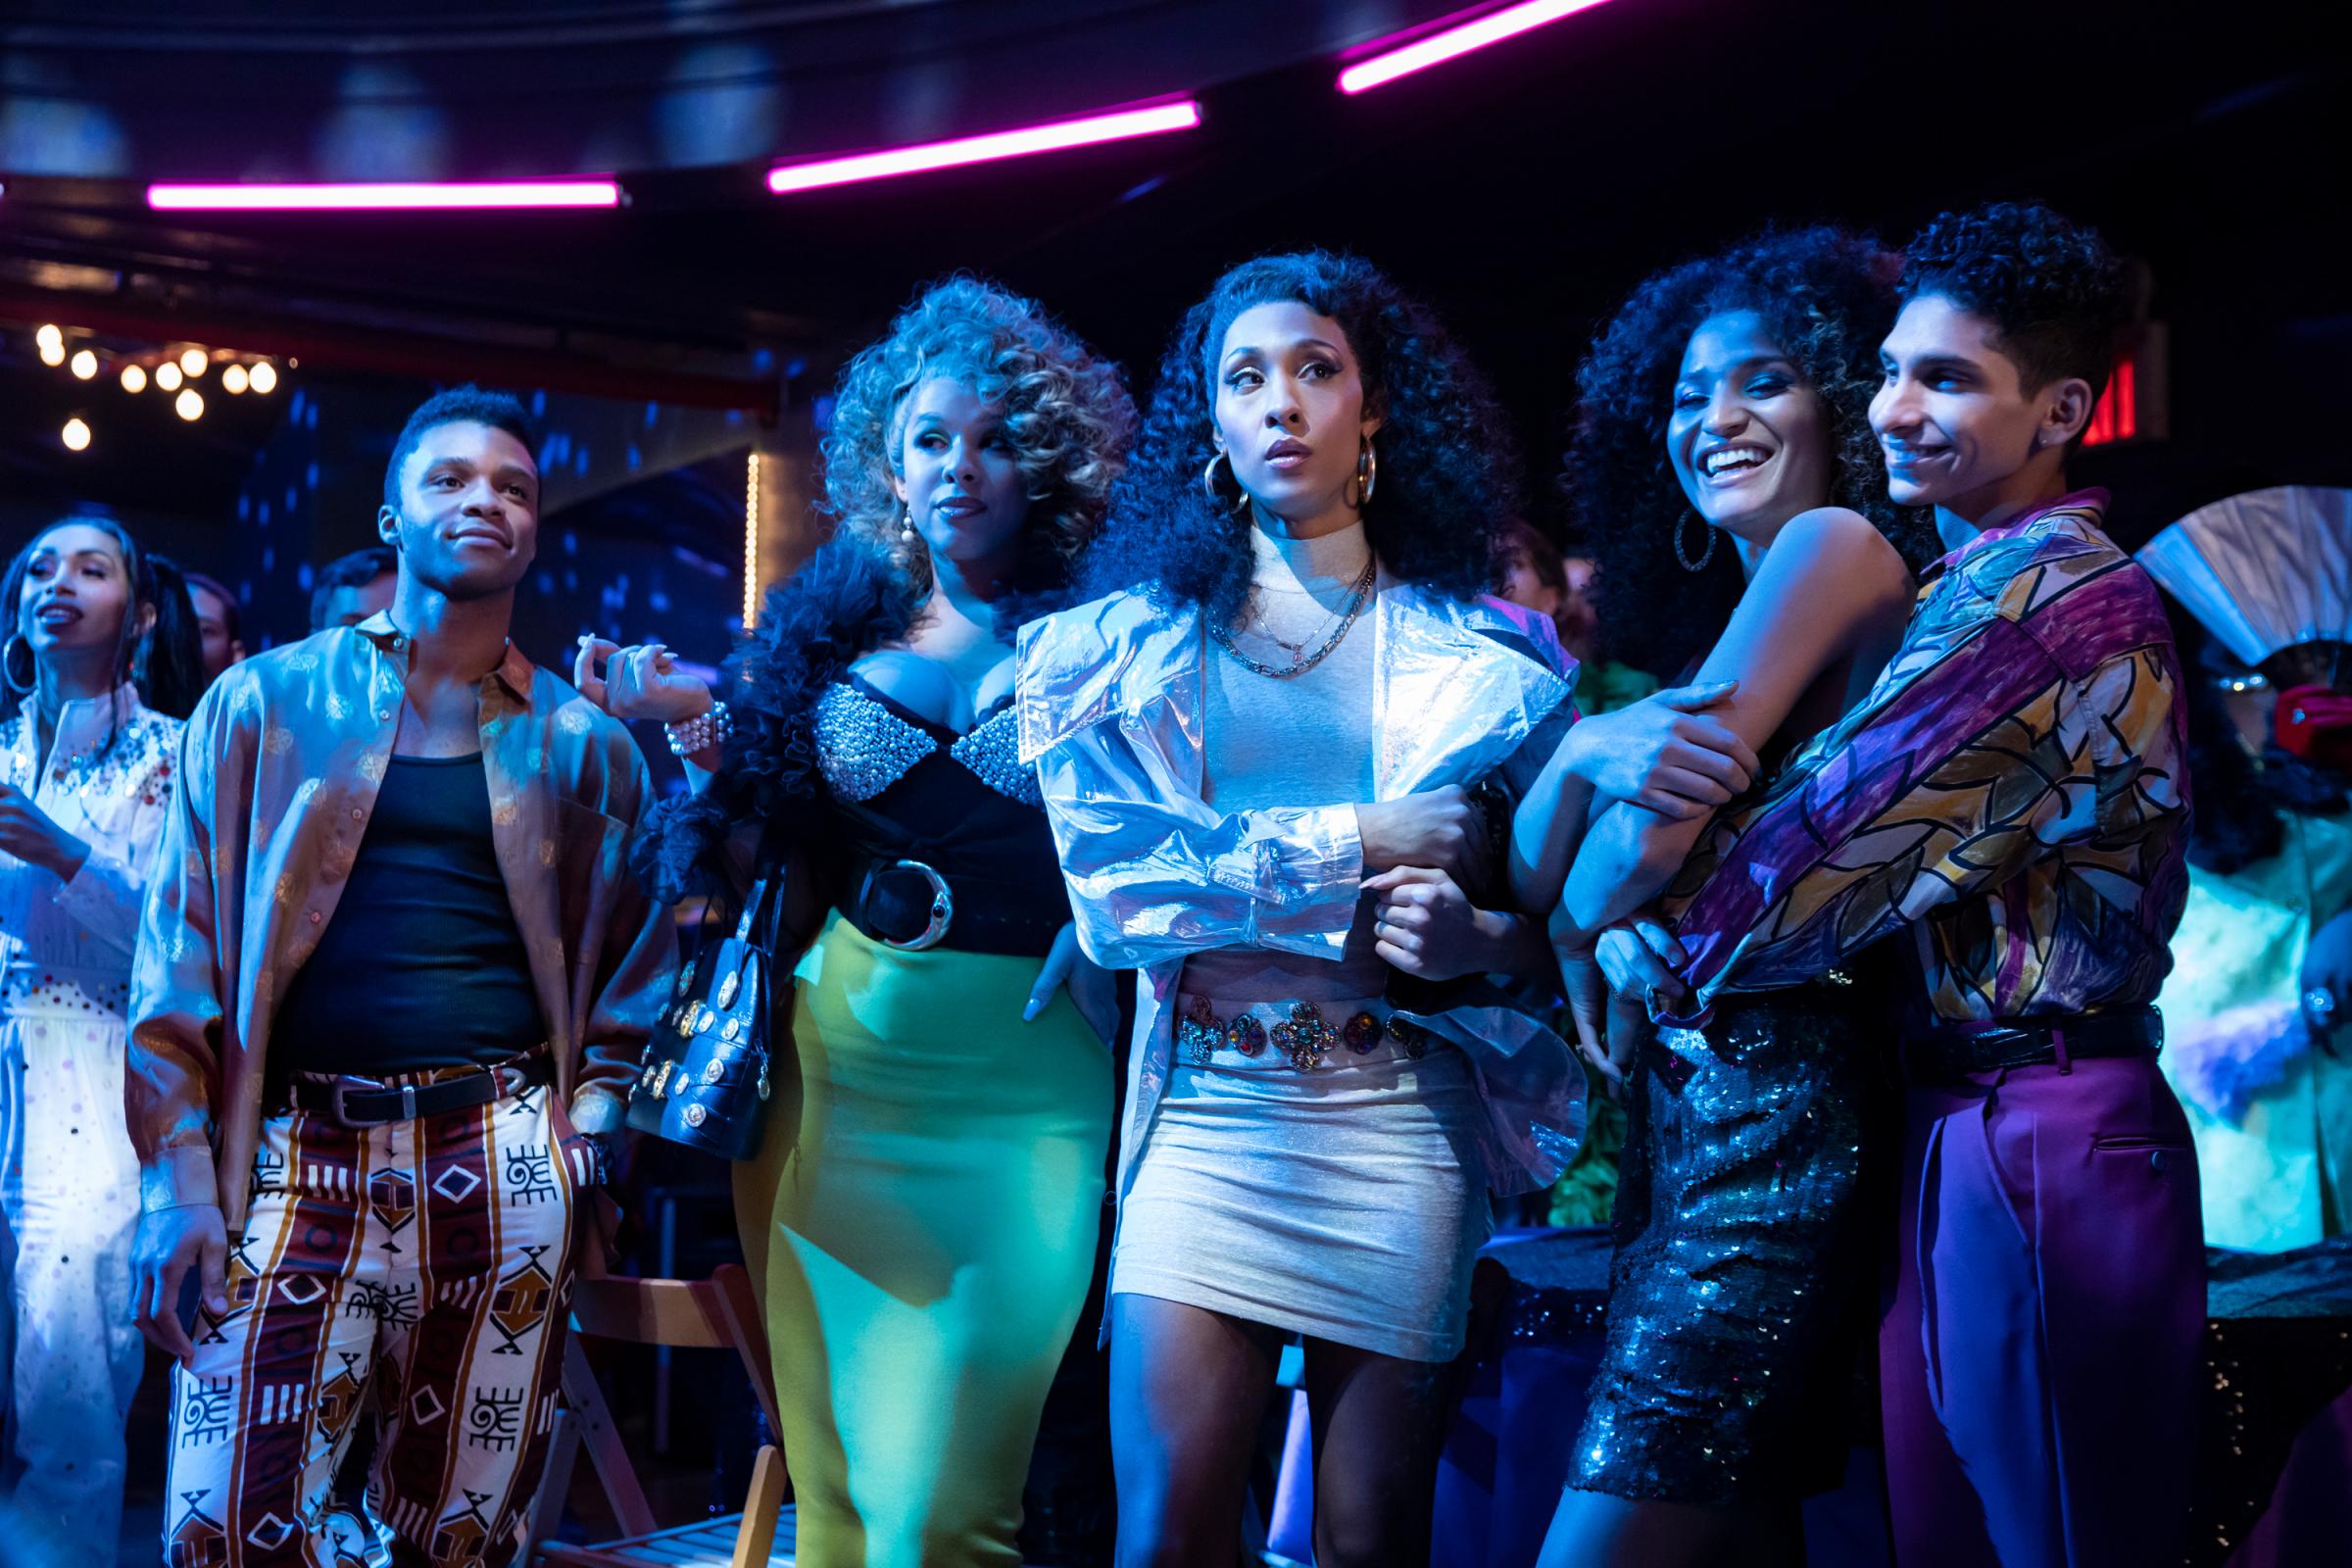 POSE -- "On The Run" -- Season 3, Episode 1 (Airs May 2) Pictured (l-r): Dyllón Burnside as Ricky, Hailie Sahar as Lulu, Mj Rodriguez as Blanca, Indya Moore as Angel, Angel Bismark Curiel as Lil Papi. CR: Eric Liebowitz/FX